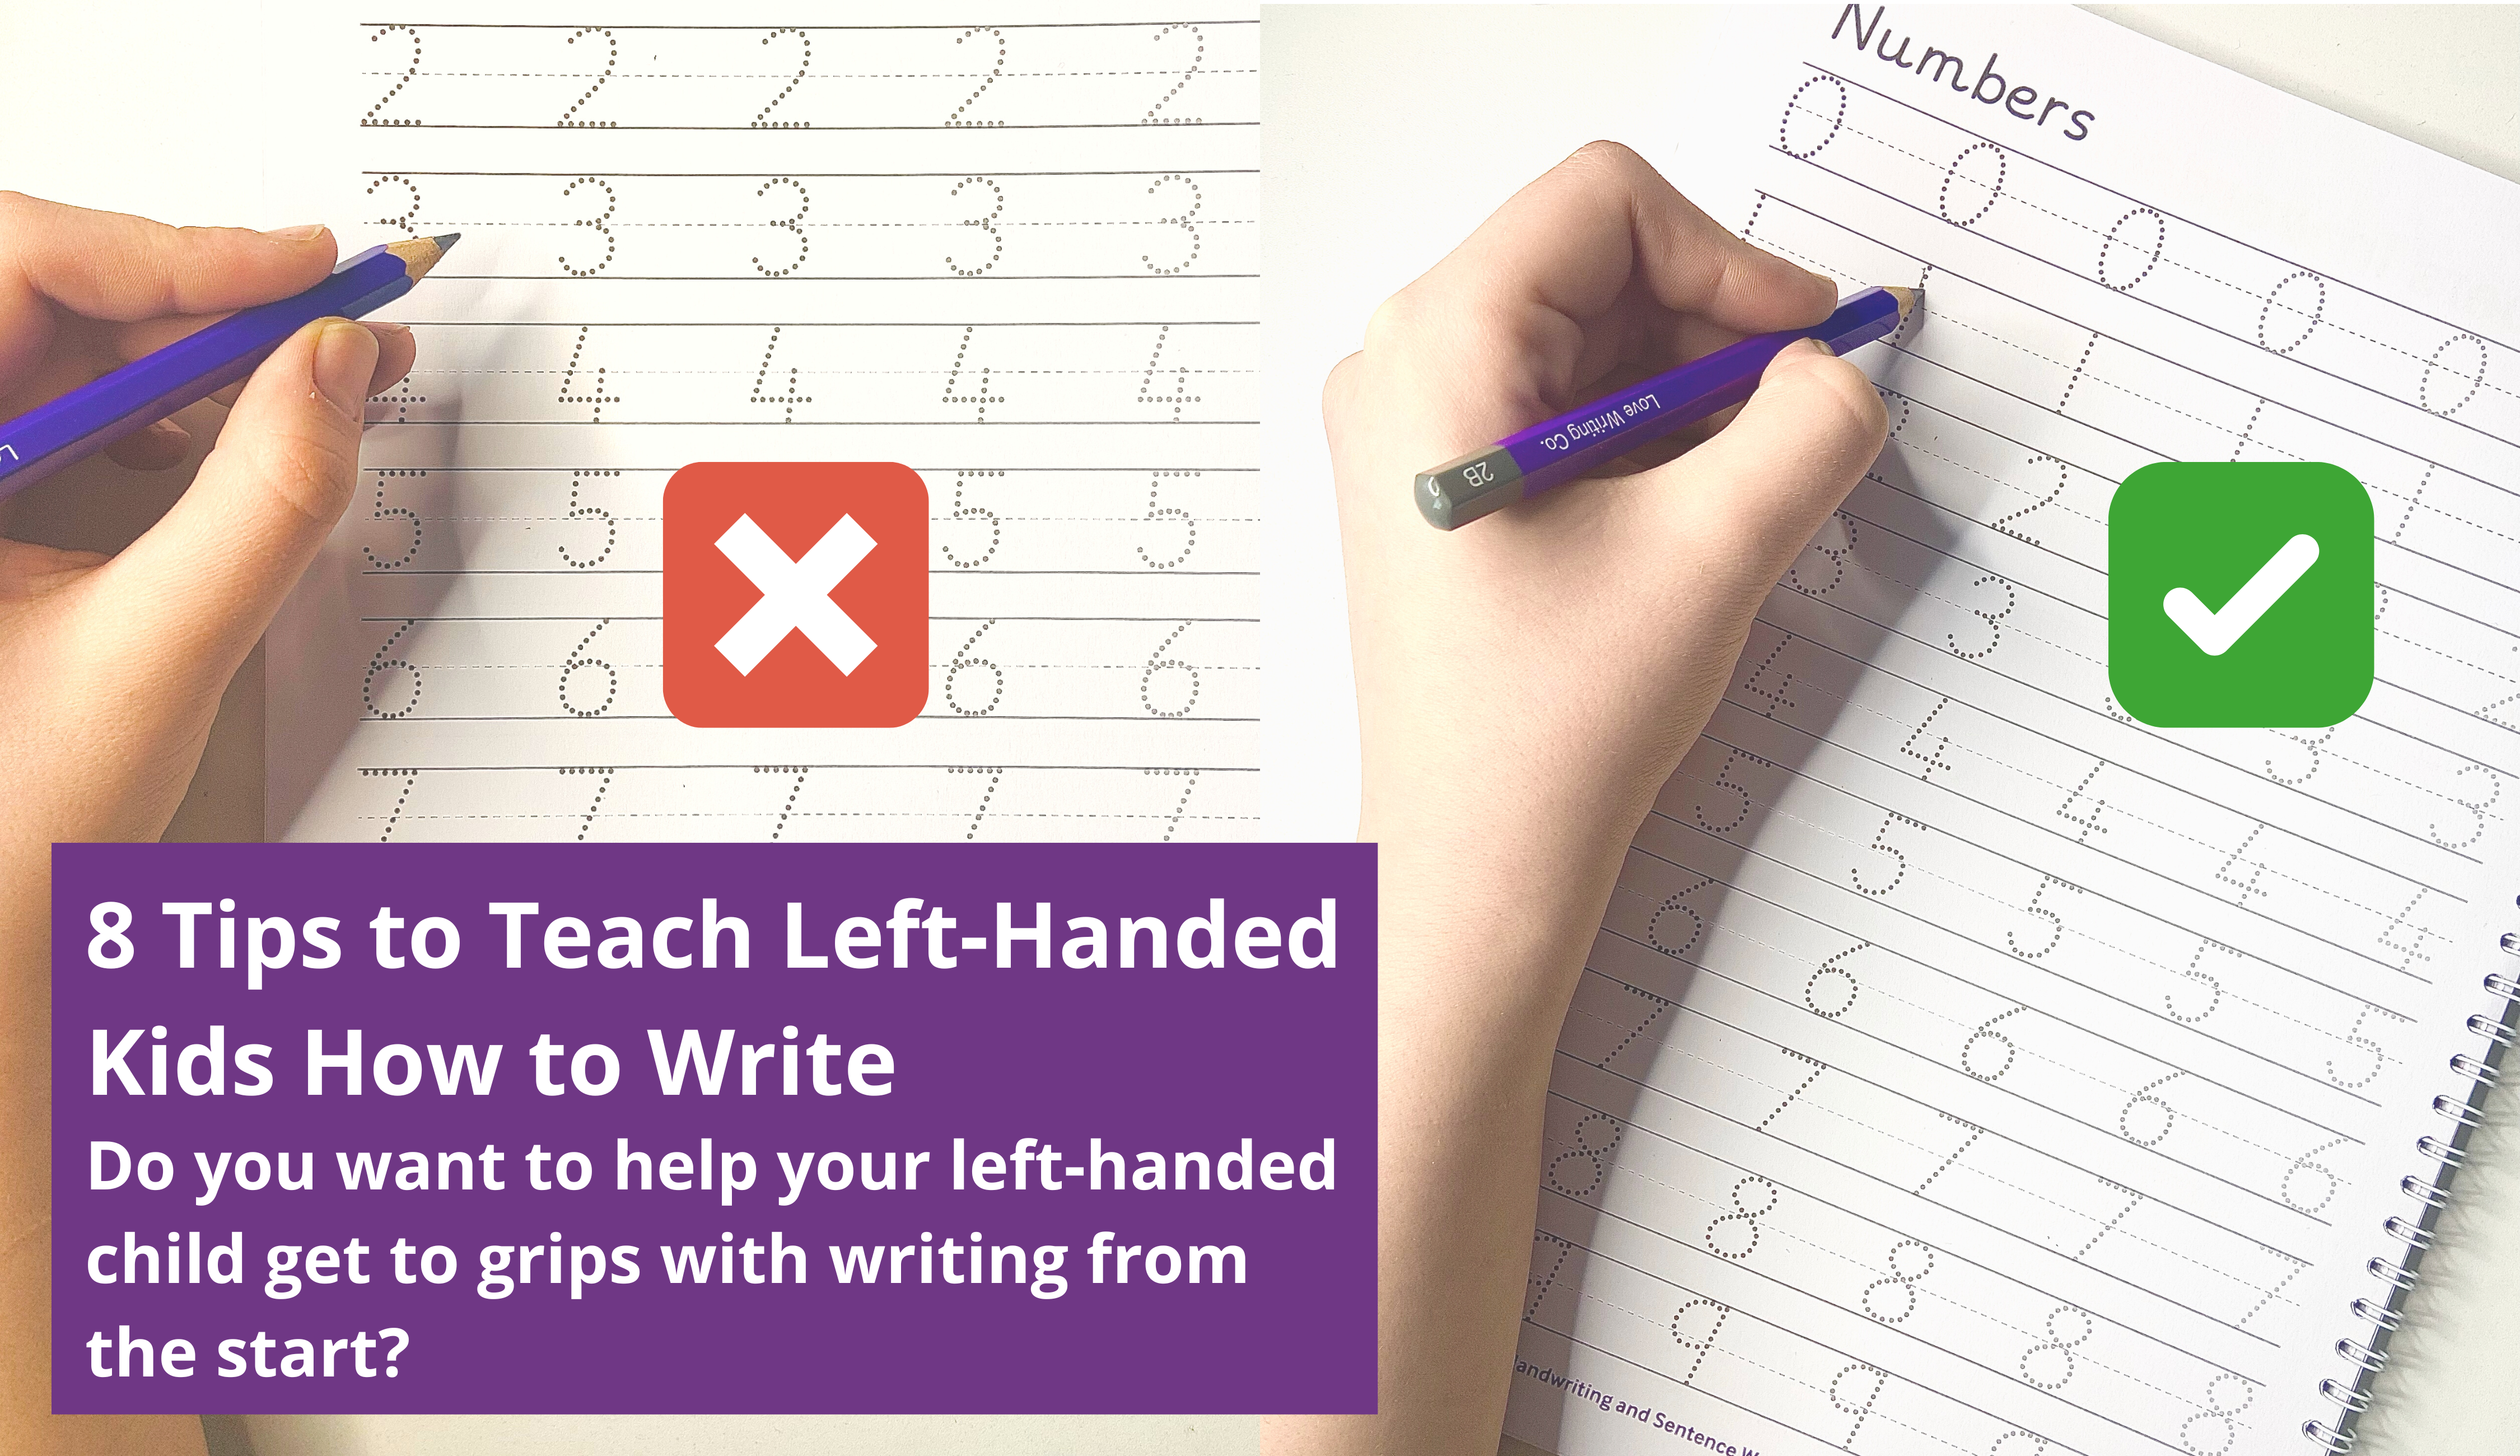 Lefty's The Left Hand Store - 4 tips